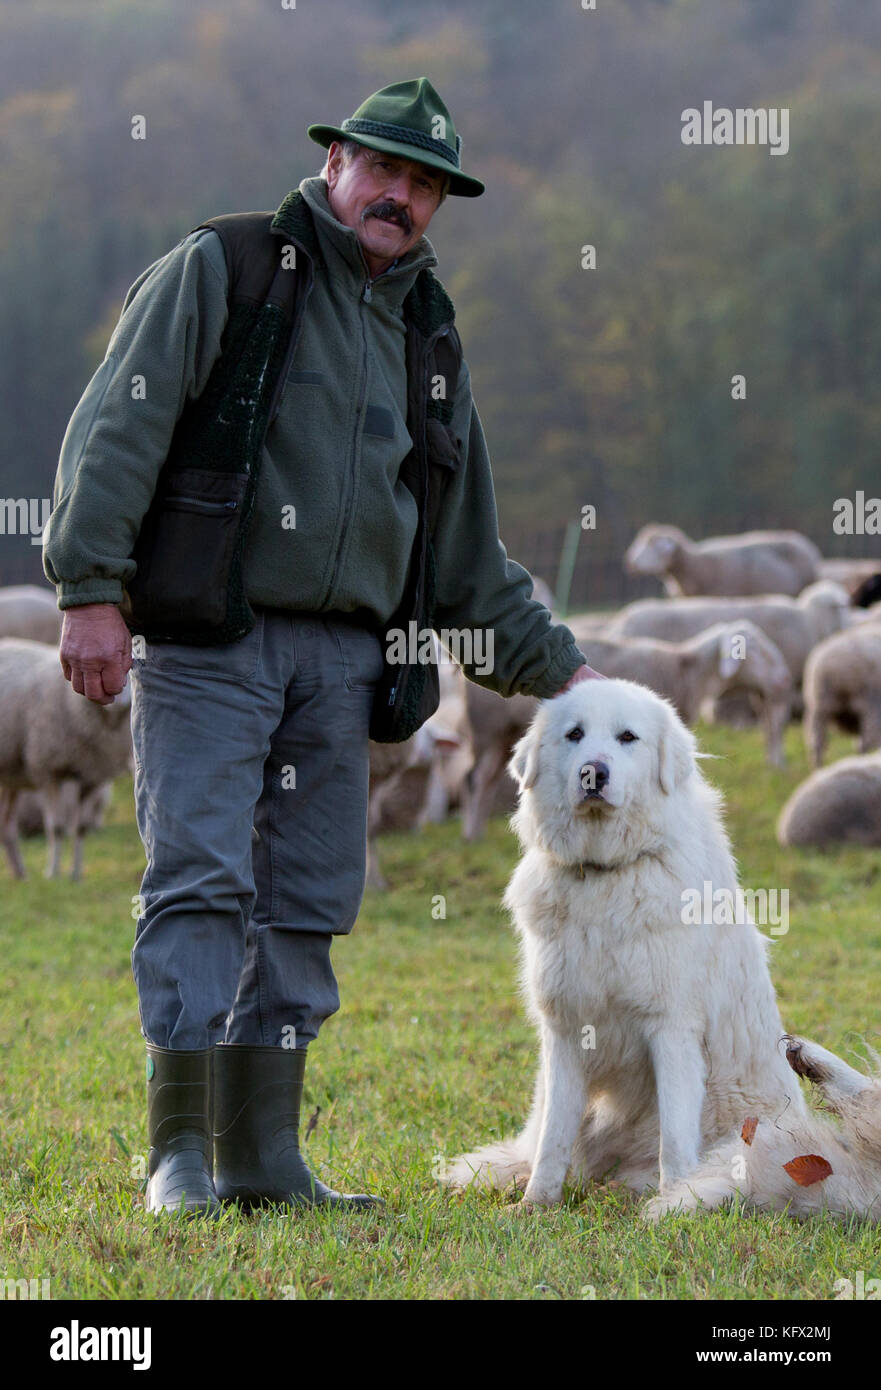 Schwaebisch Hall, Germany. 30th Oct, 2017. Shepherd Manfred Voigt stands next to the livestock guardian dog Alara, Great Pyrenees, and his flock of sheep on a meadow in Schwaebisch Hall, Germany, 30 October 2017. The dogs are meant to scare away wolfs. Credit: Christoph Schmidt/dpa/Alamy Live News Stock Photo